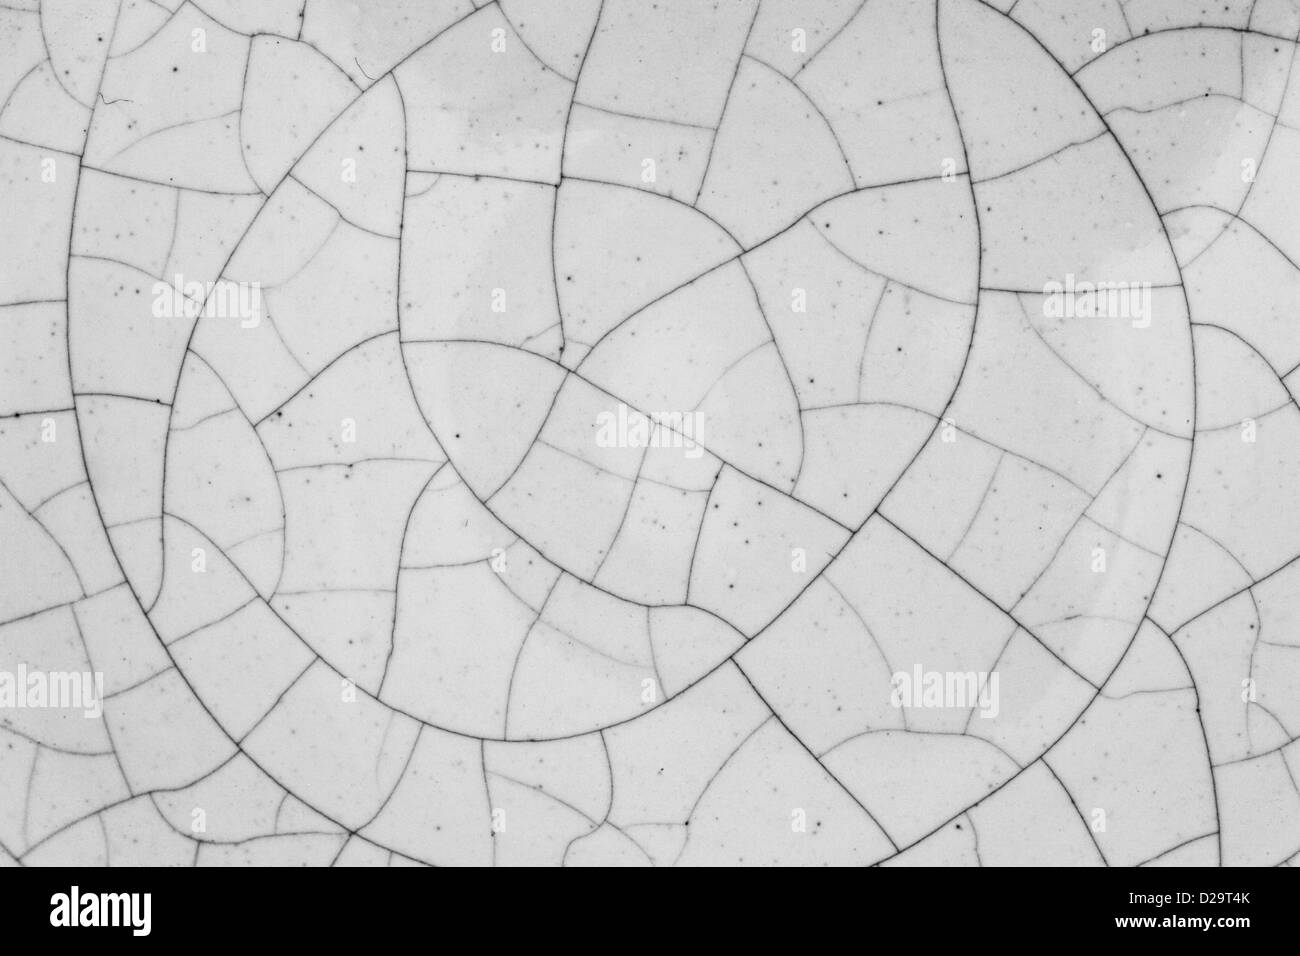 Crackled abstract texture Stock Photo